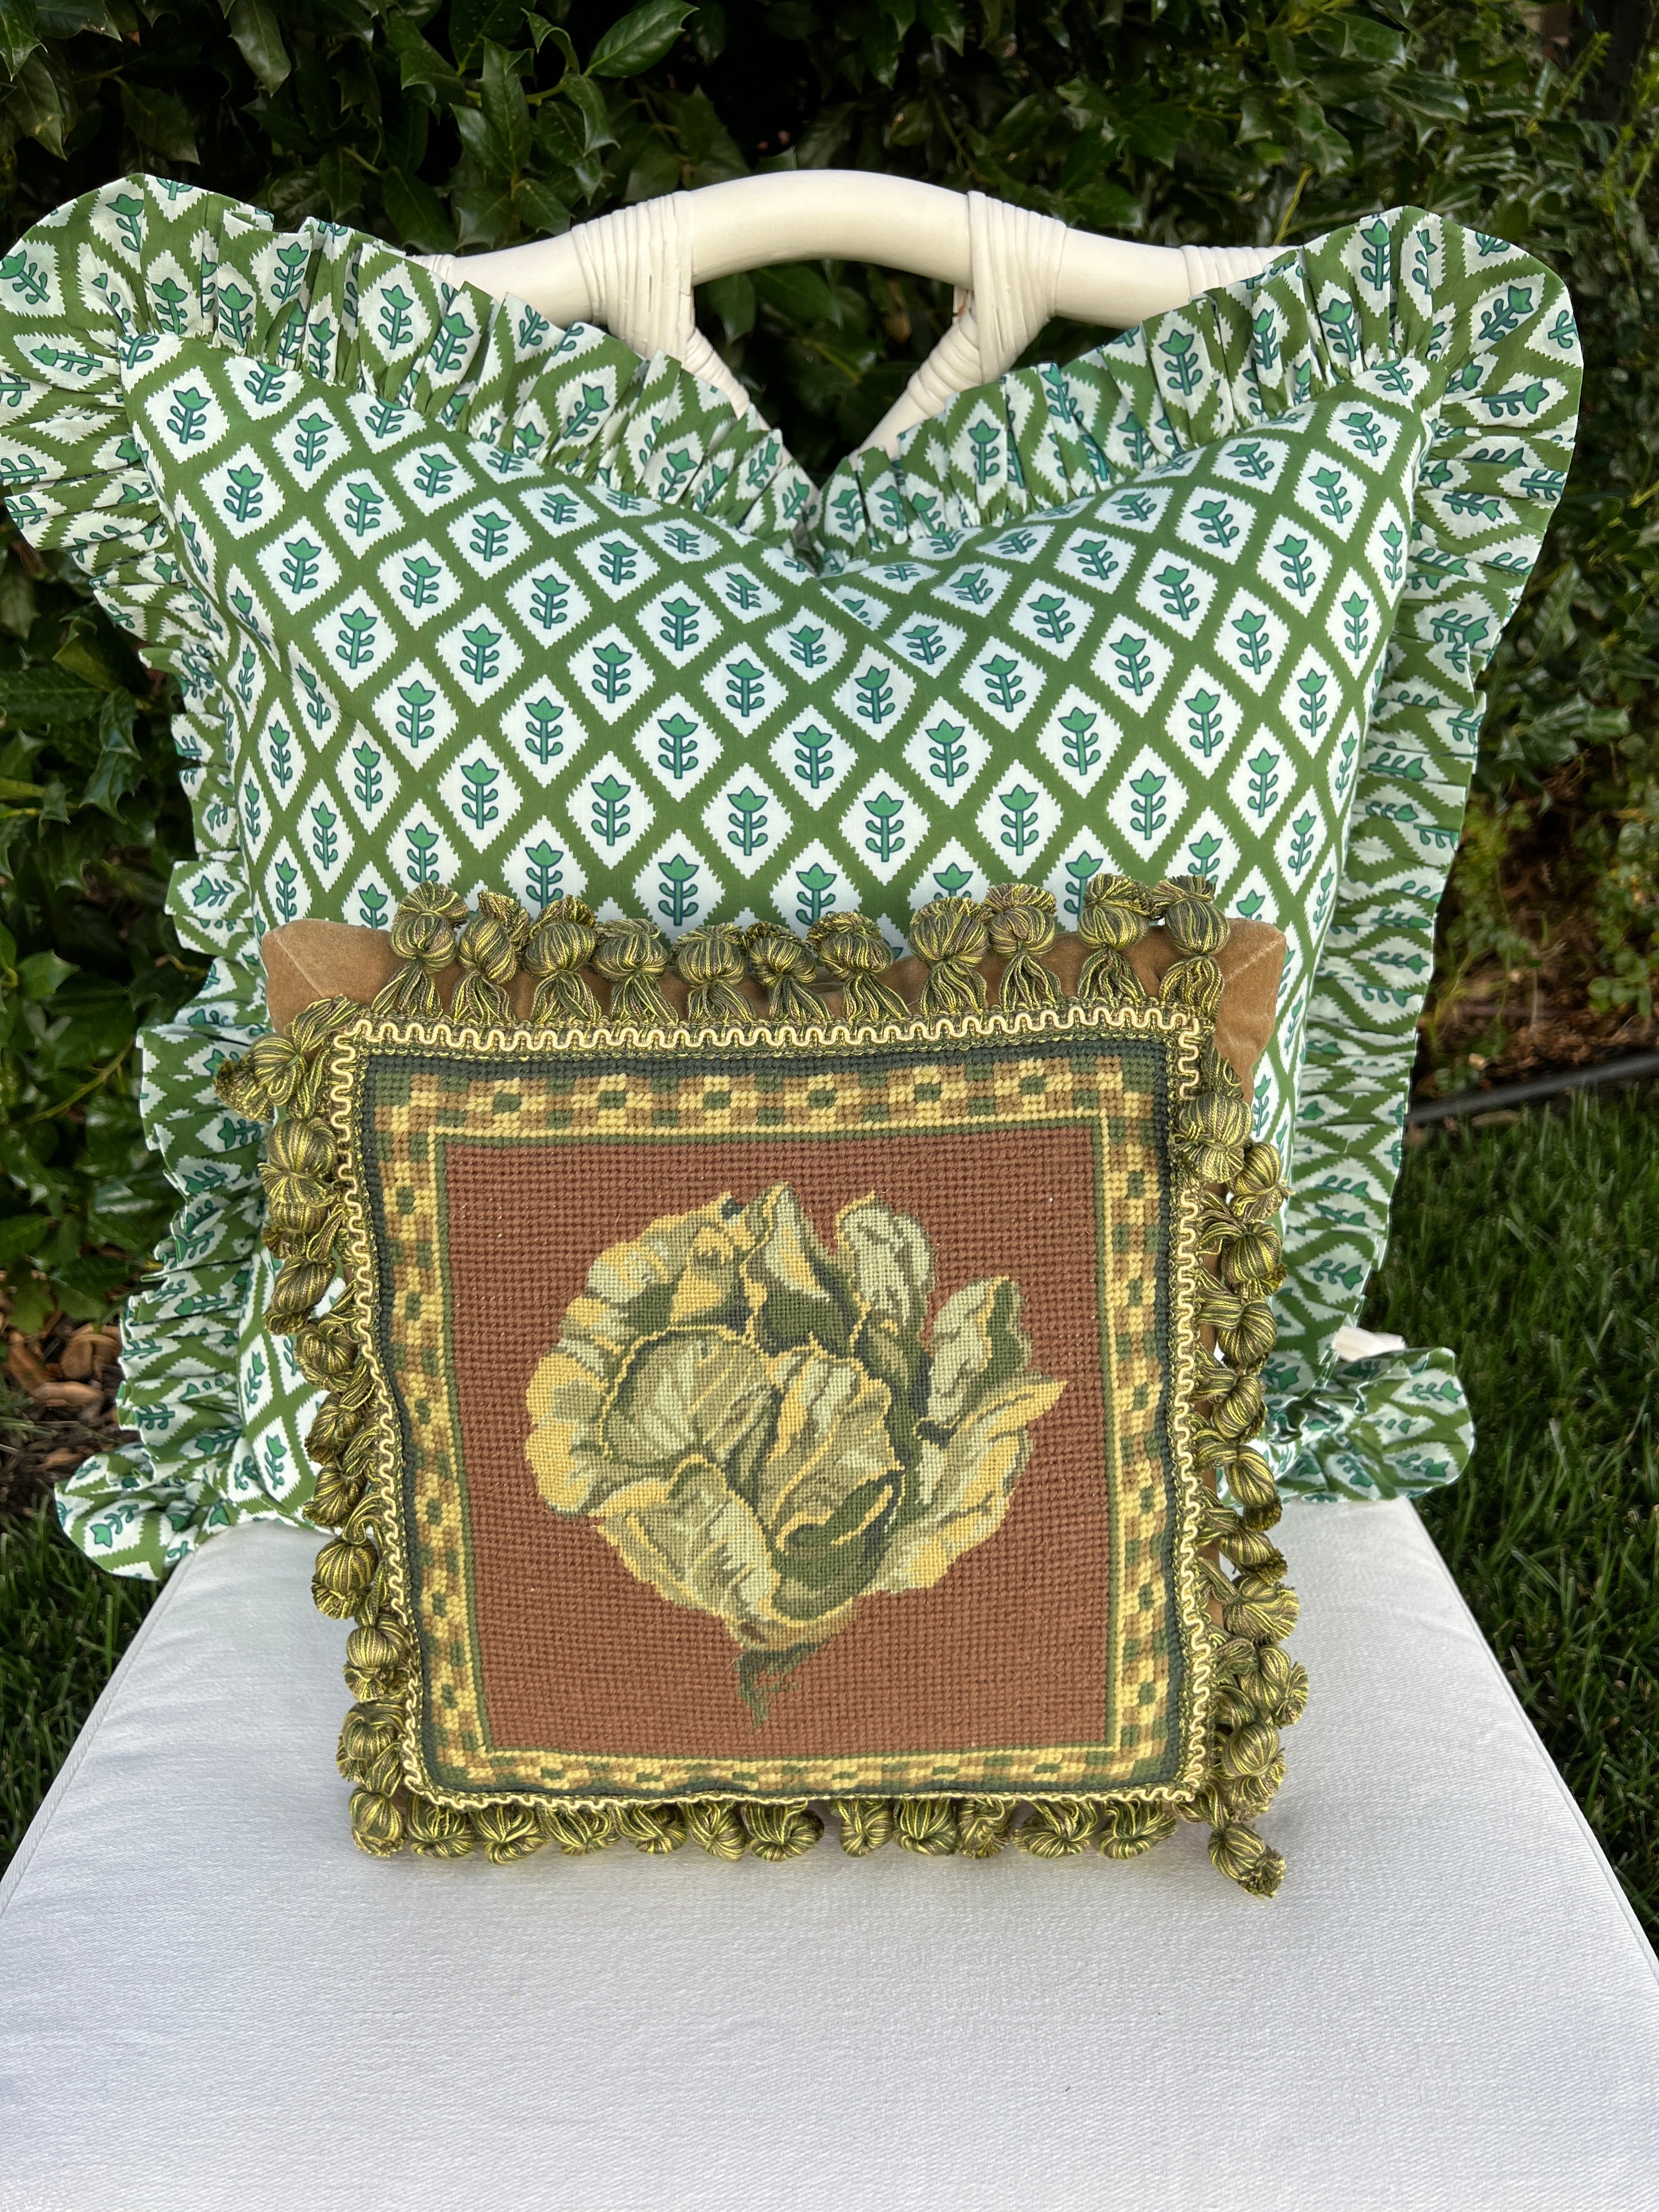 Needlepoint cabbage pillow